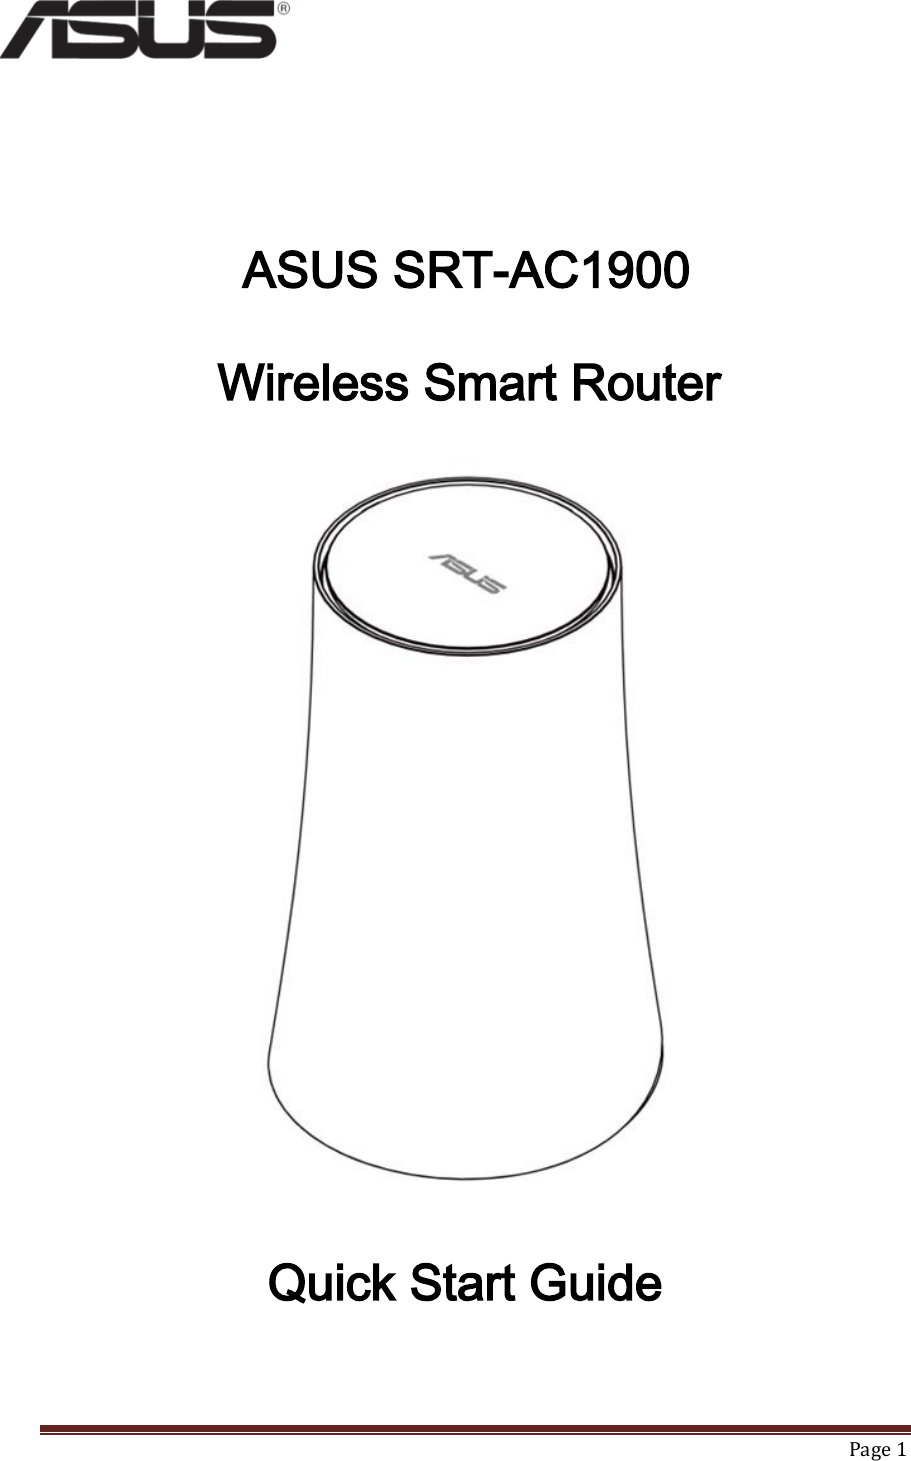   Page 1      ASUS SRT-AC1900 Wireless Smart Router        Quick Start Guide    